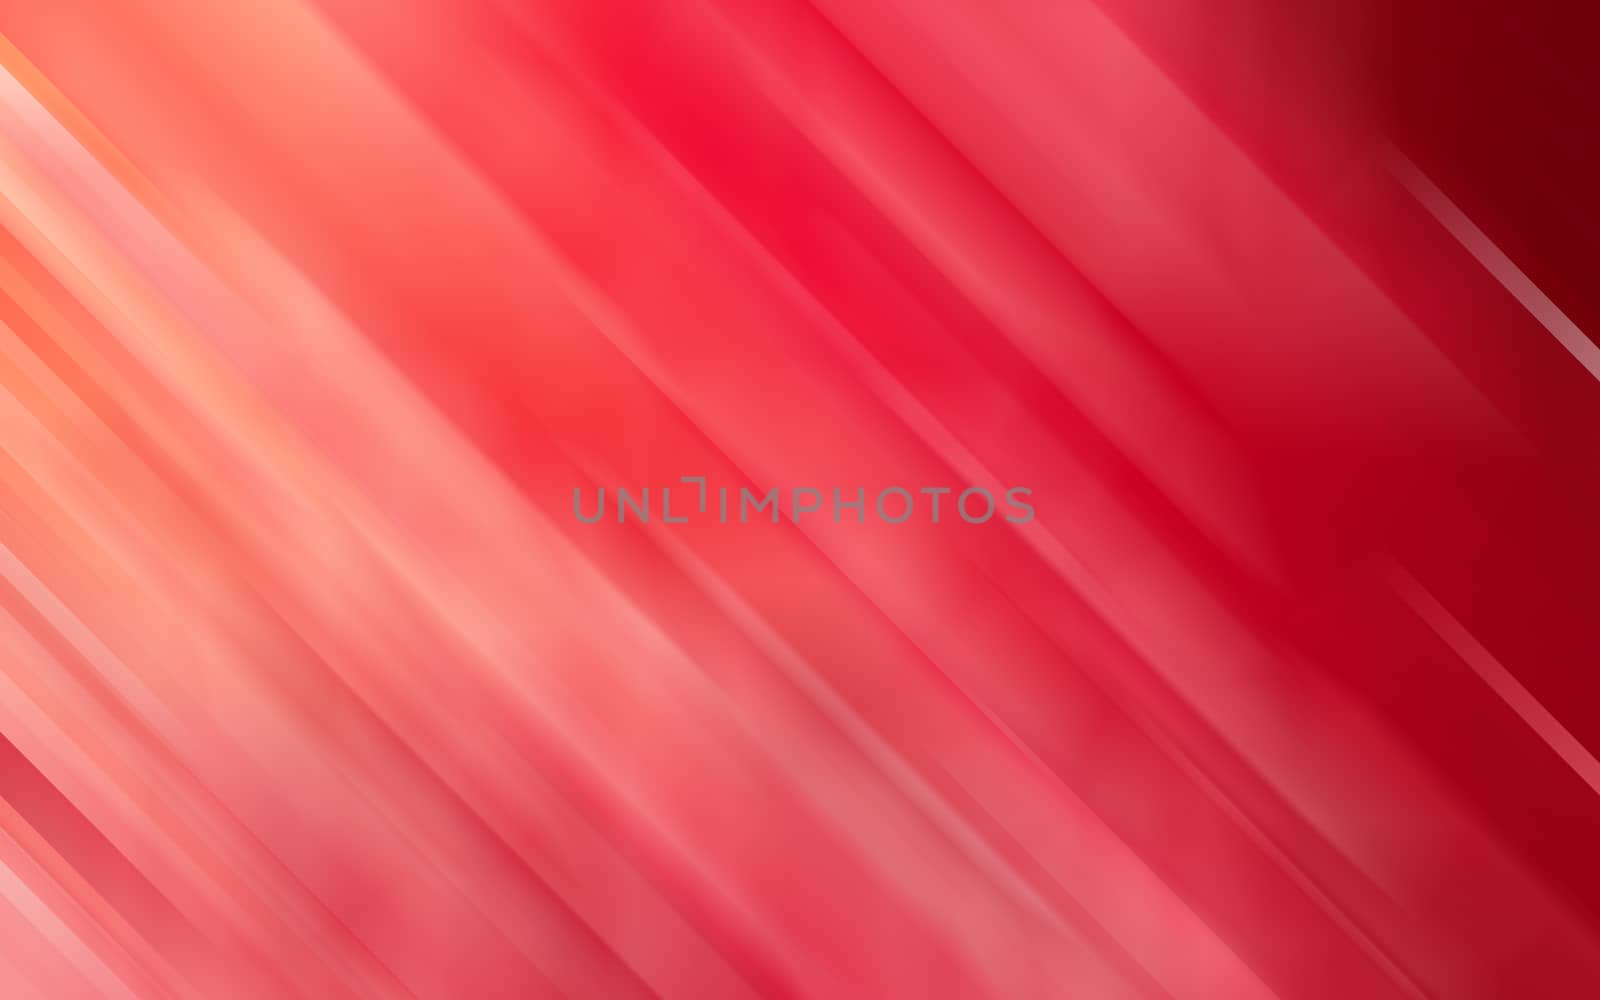 motion blur abstract background by teerawit